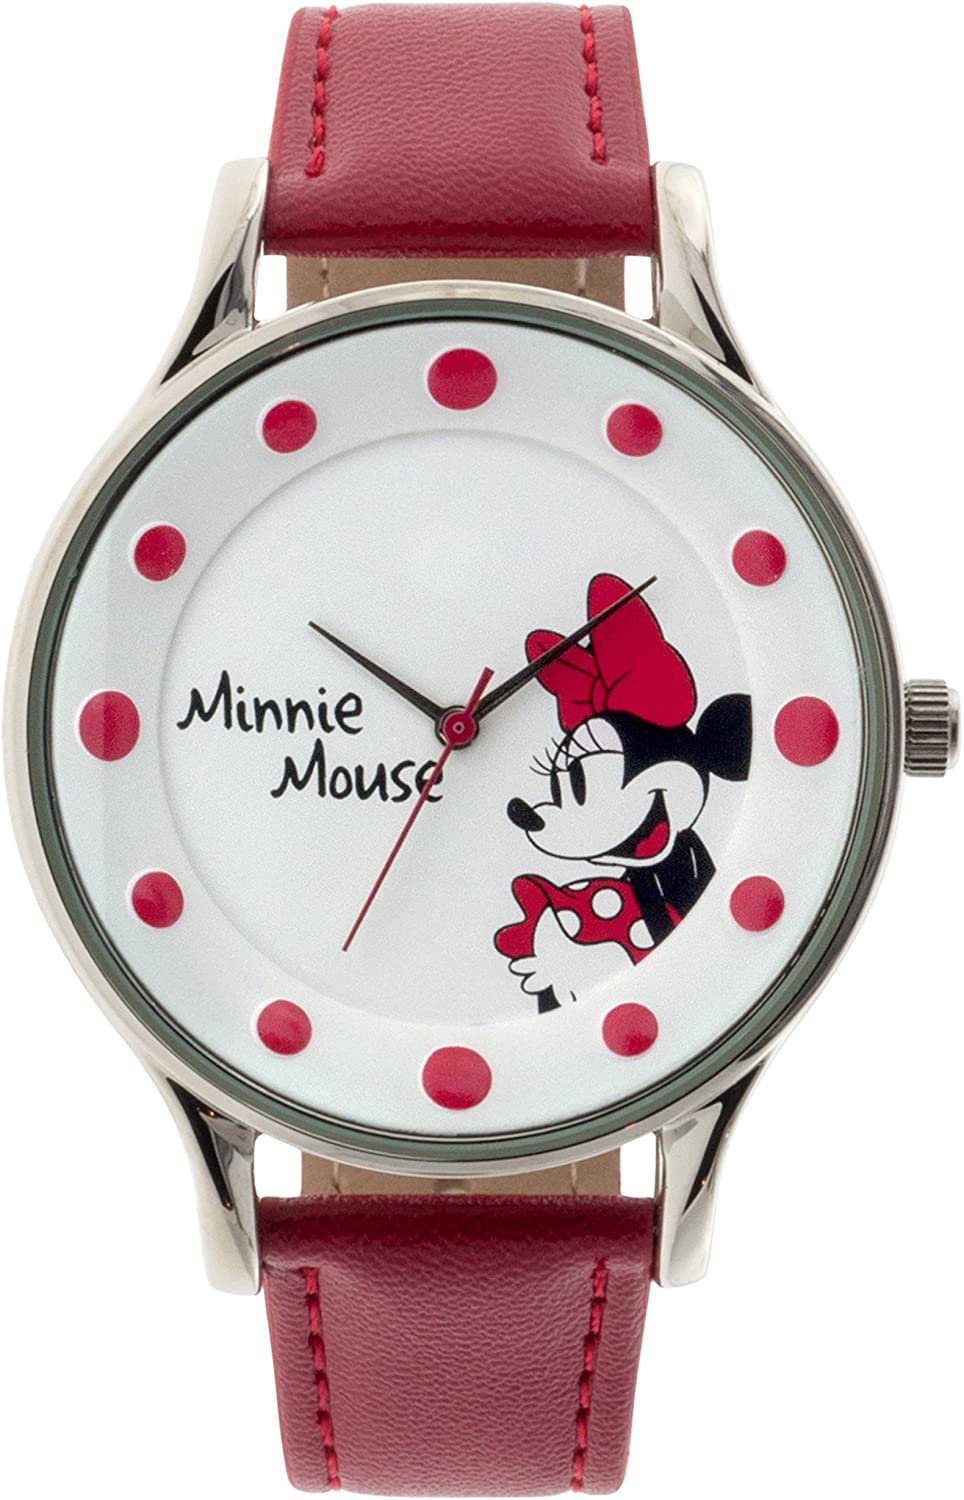 Model: Women's Disney Minnie Mouse Red Analog Display Watch